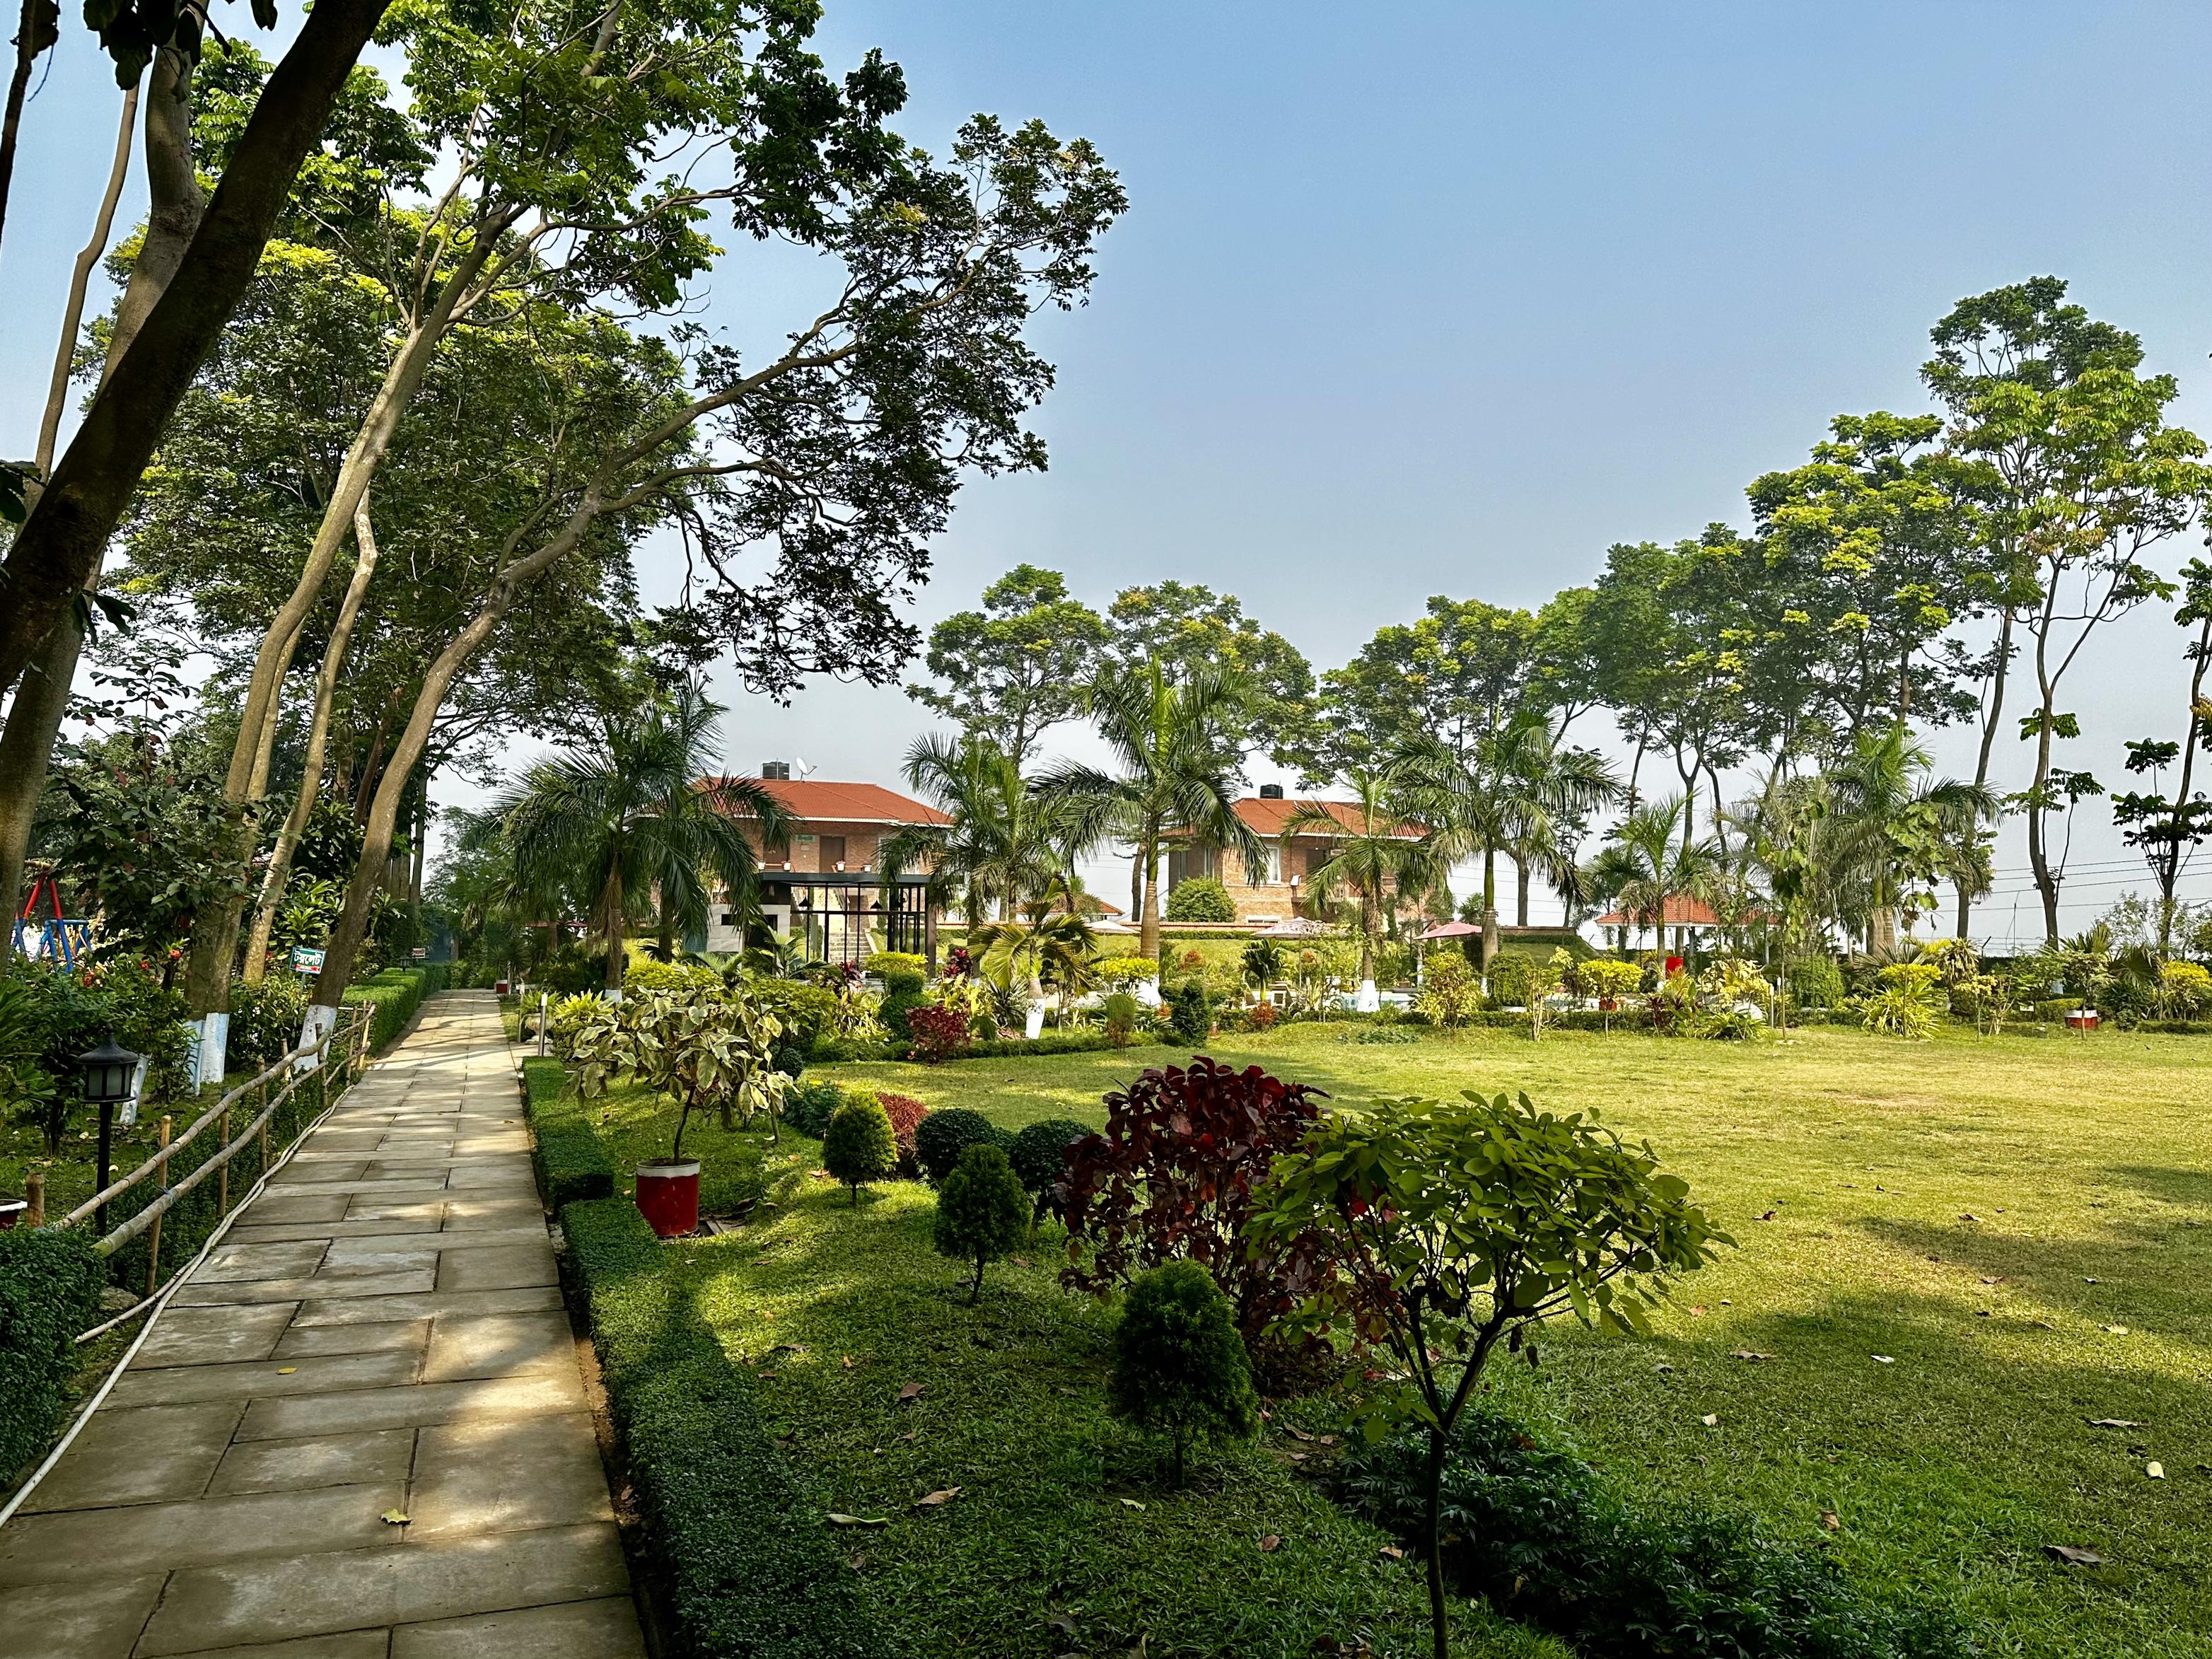 Scenic garden pathway leading to cottage-style accommodations at a lush Barnochata resort near Dhaka, located in Gazipur, a prime Dhaka hotel destination